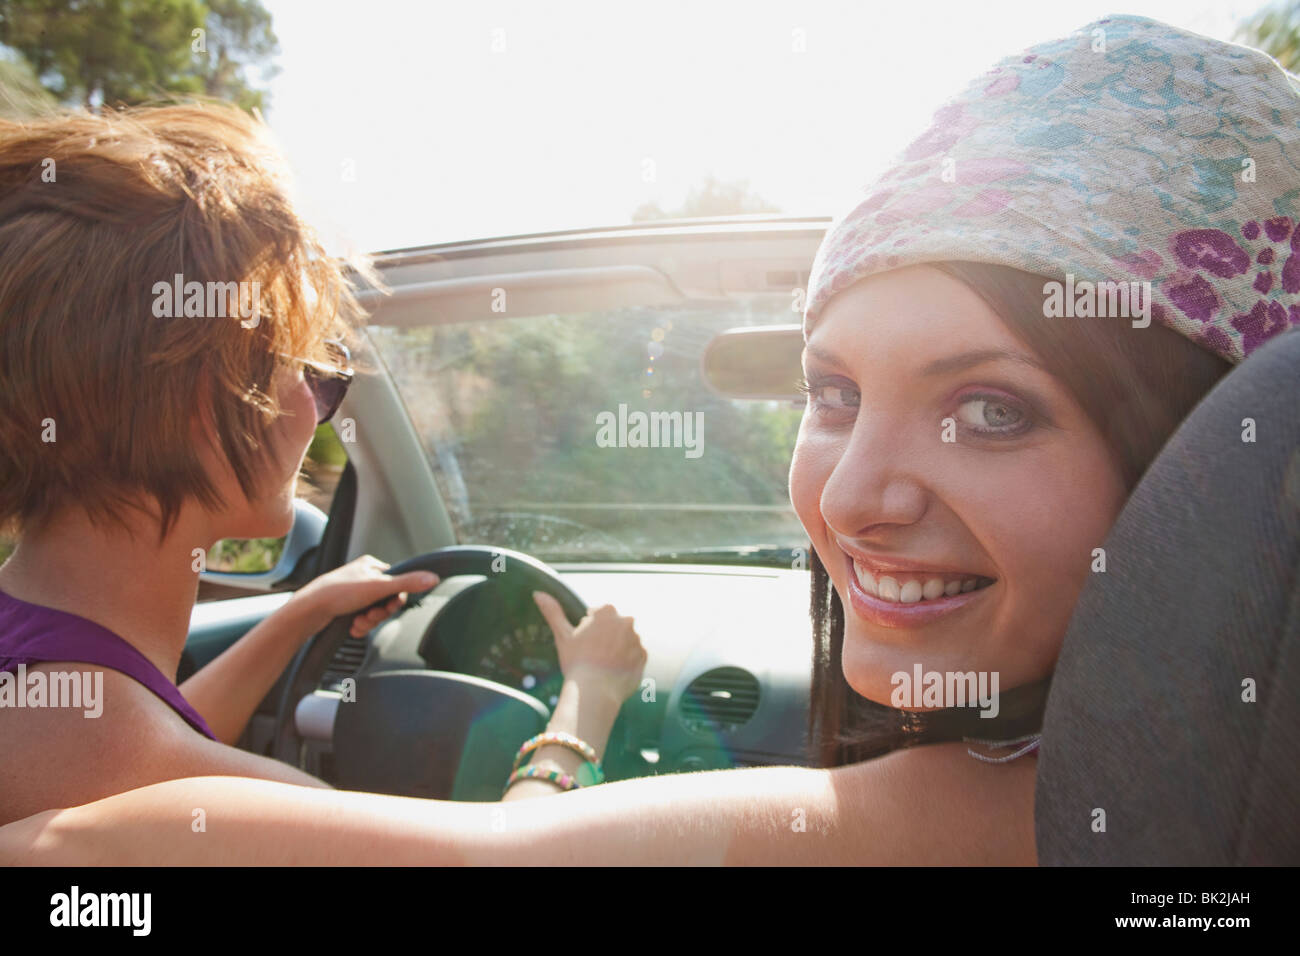 Two women in convertible car in the sun Stock Photo